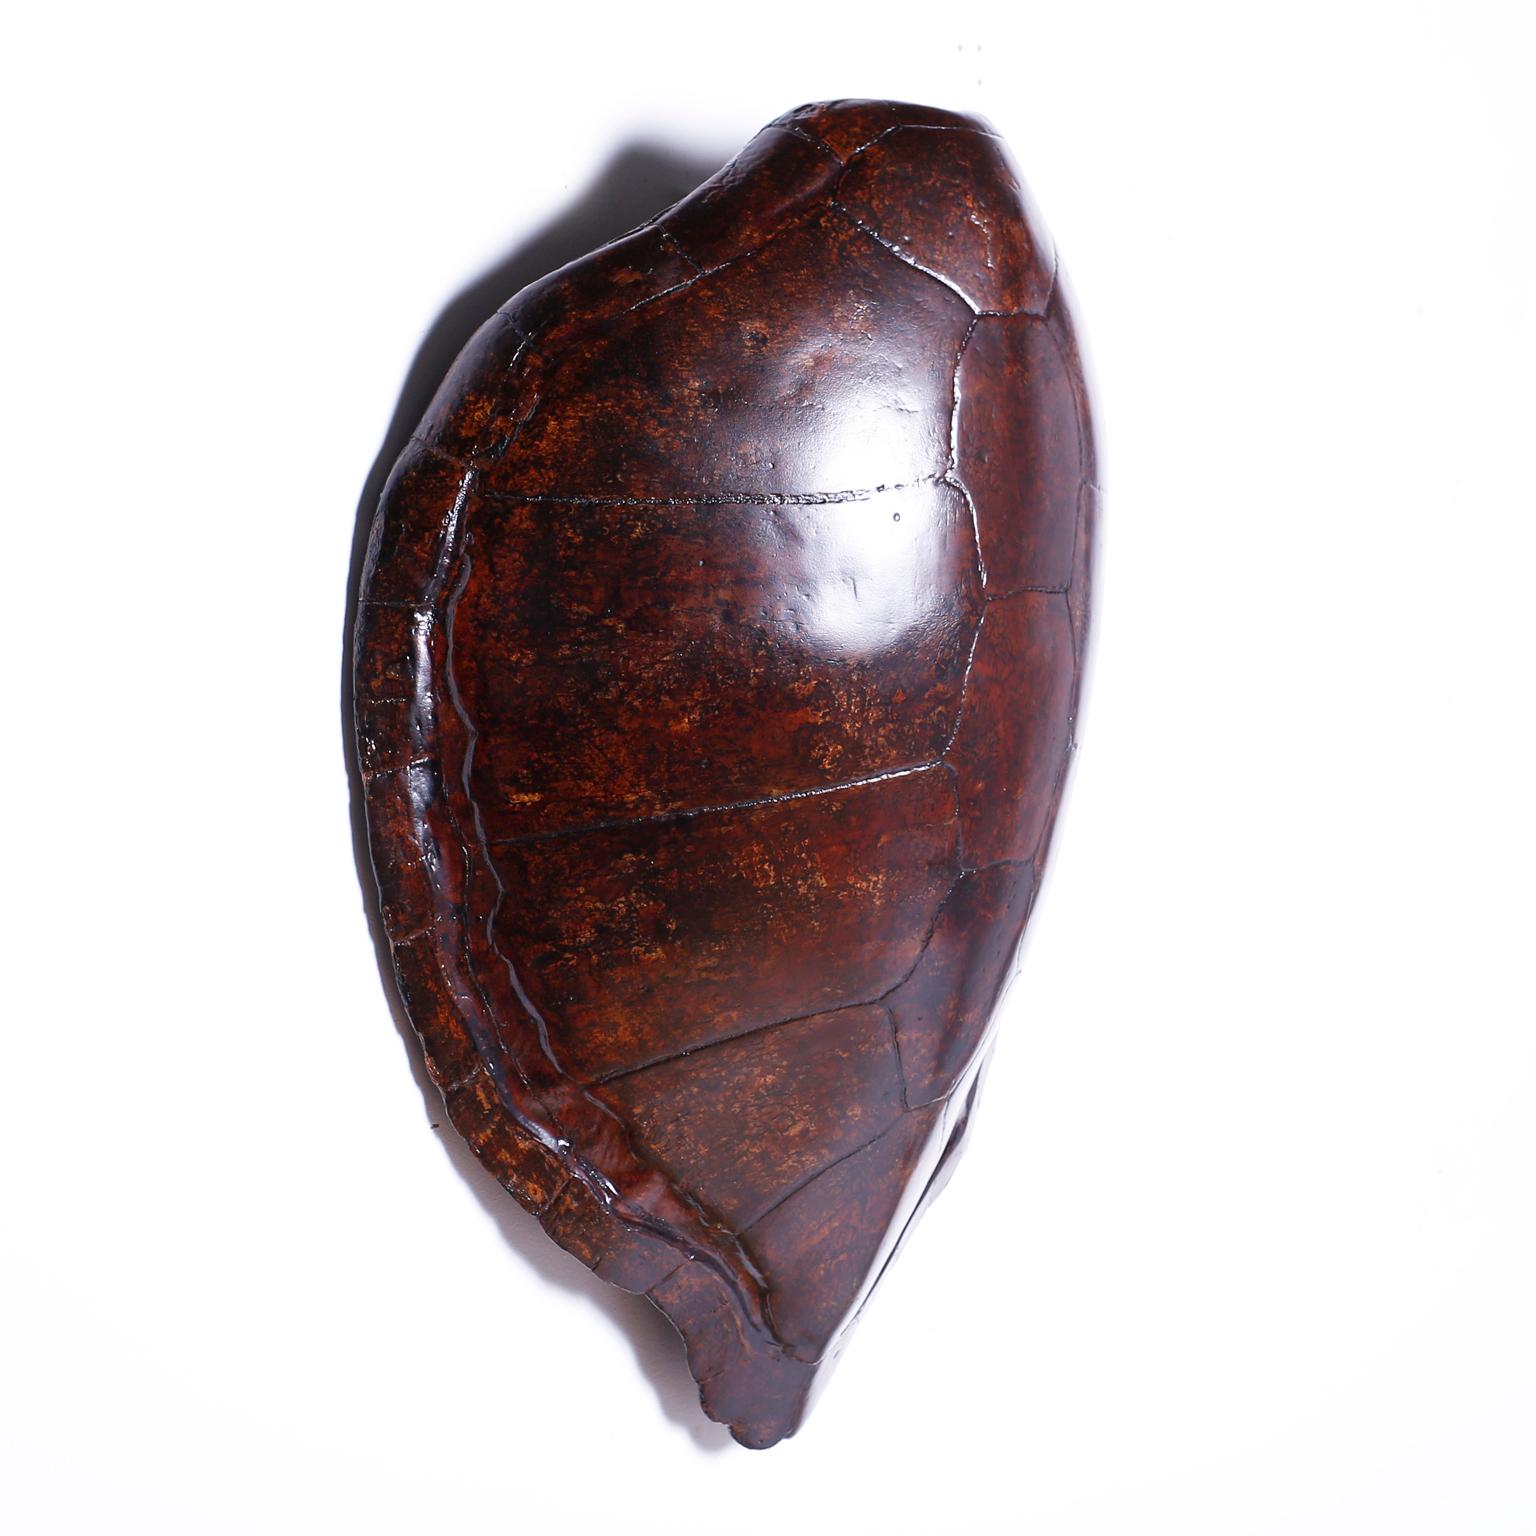 Authentic antique turtle shell buffed and polished displaying one of mother nature's most iconic designs to be enjoyed for generations to come.